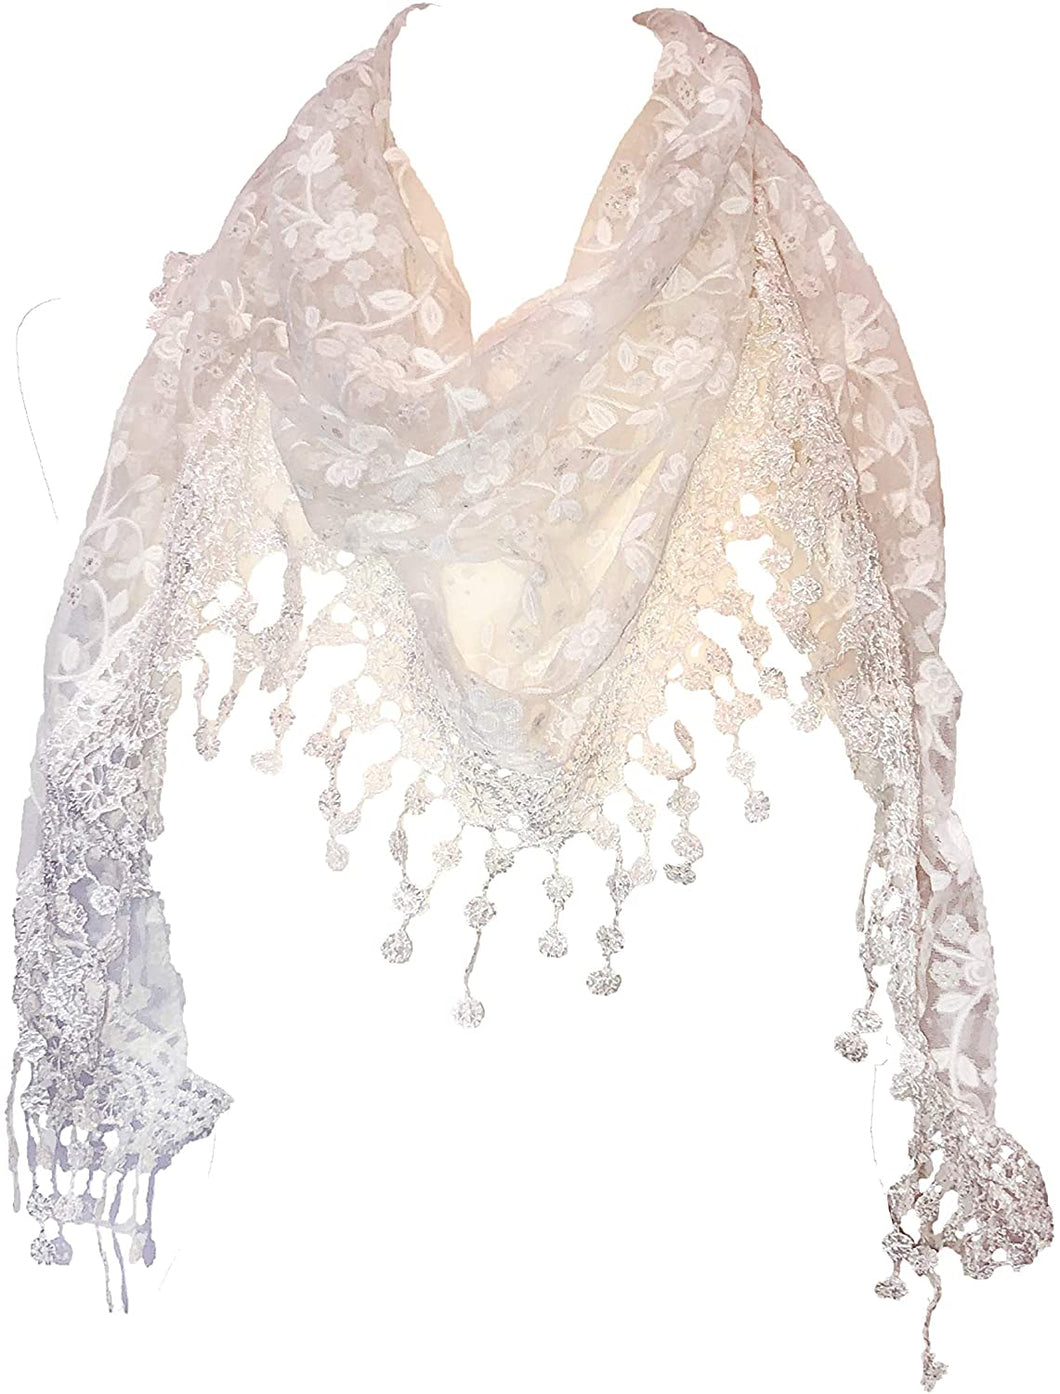 Pamper Yourself Now Creamy White with White Glittery Flower lace Triangle Scarf with lace Trim